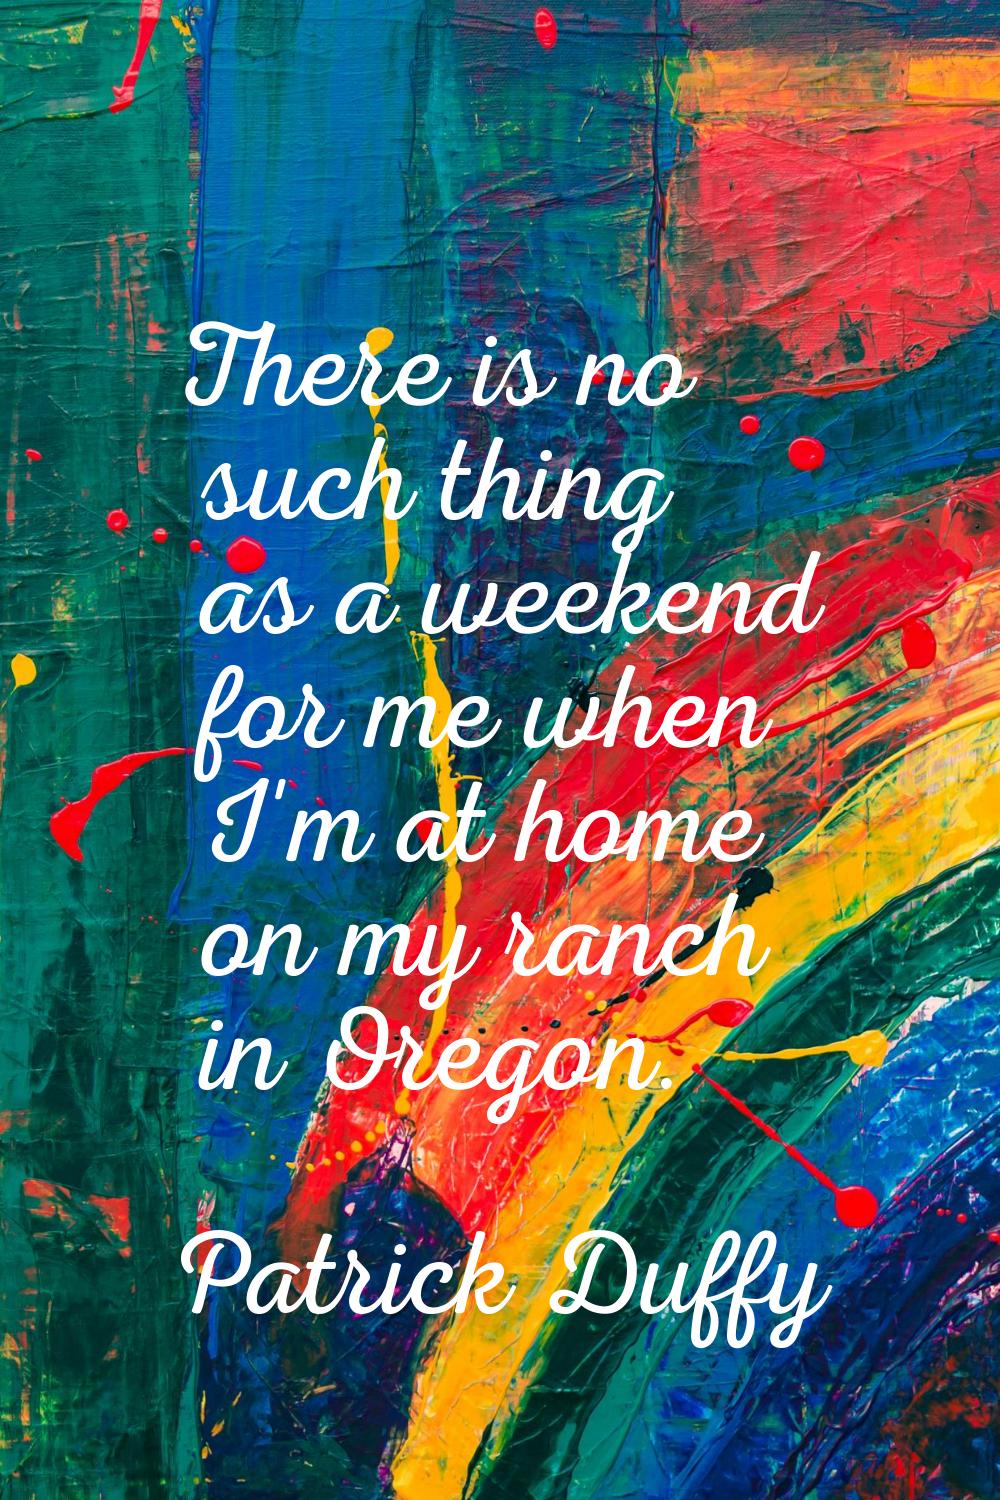 There is no such thing as a weekend for me when I'm at home on my ranch in Oregon.